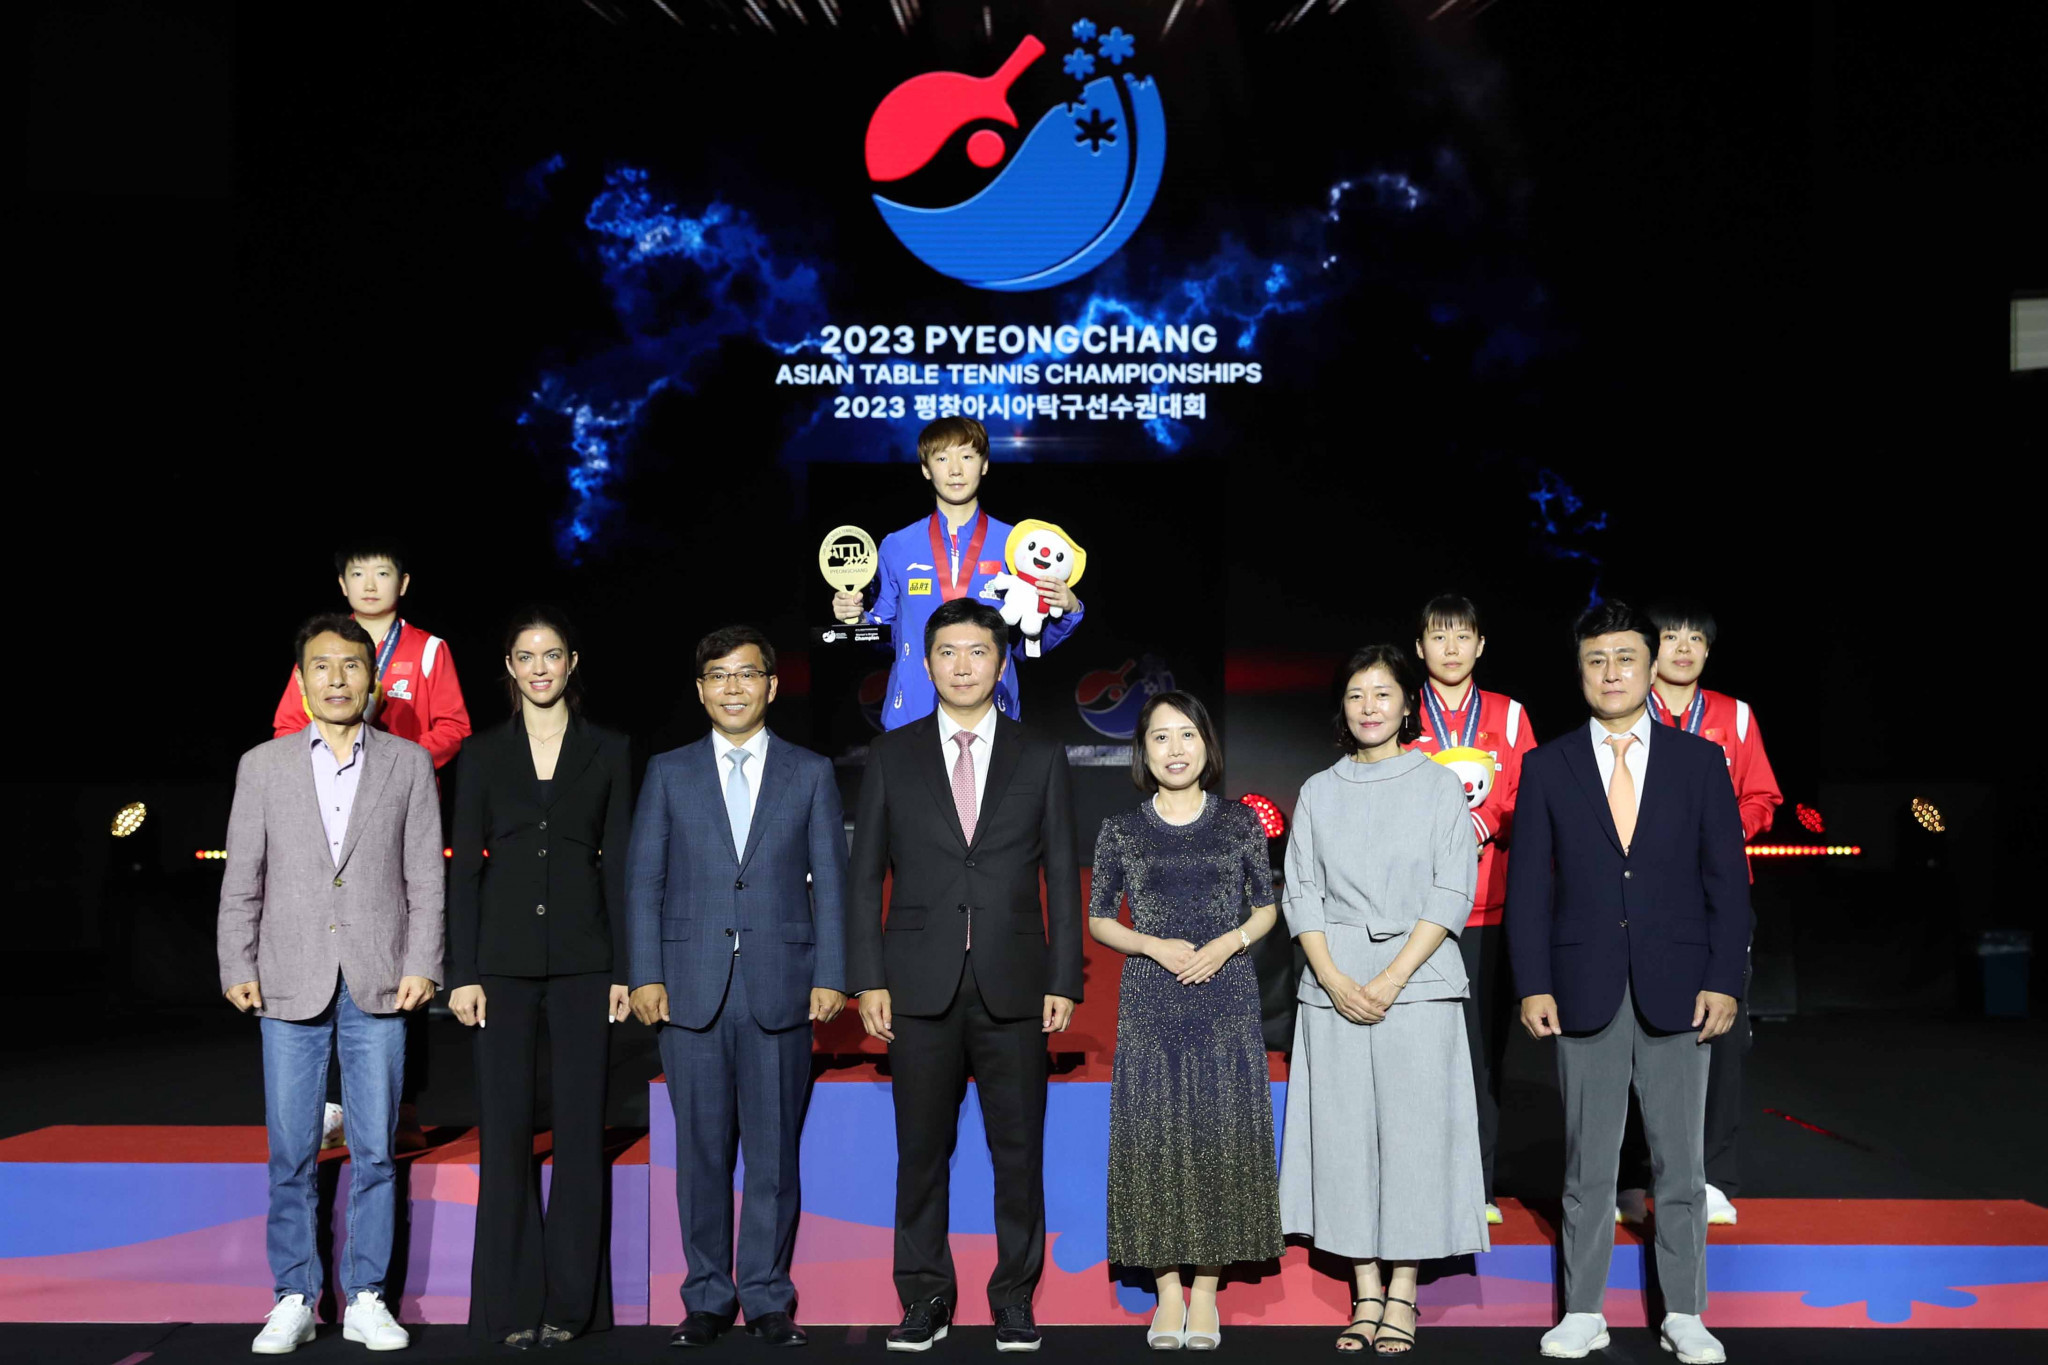 Wang Manyu, second left at back, led a Chinese podium sweep in the women's singles at the Asian Table Tennis Championships ©Asian Table Tennis Union